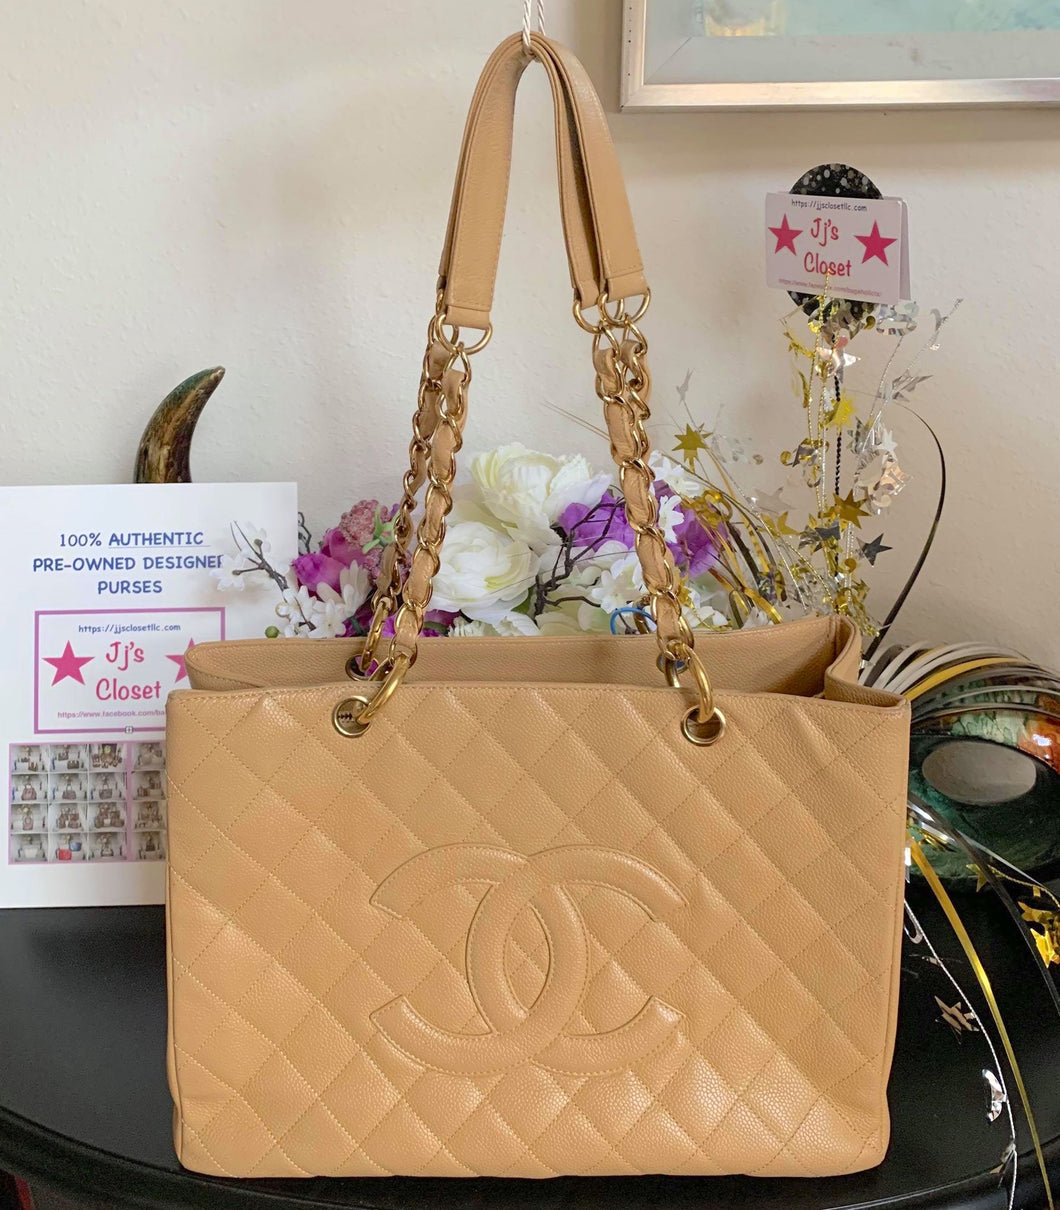 Chanel Beige Leather GST Grand Shopping Tote - Chanel